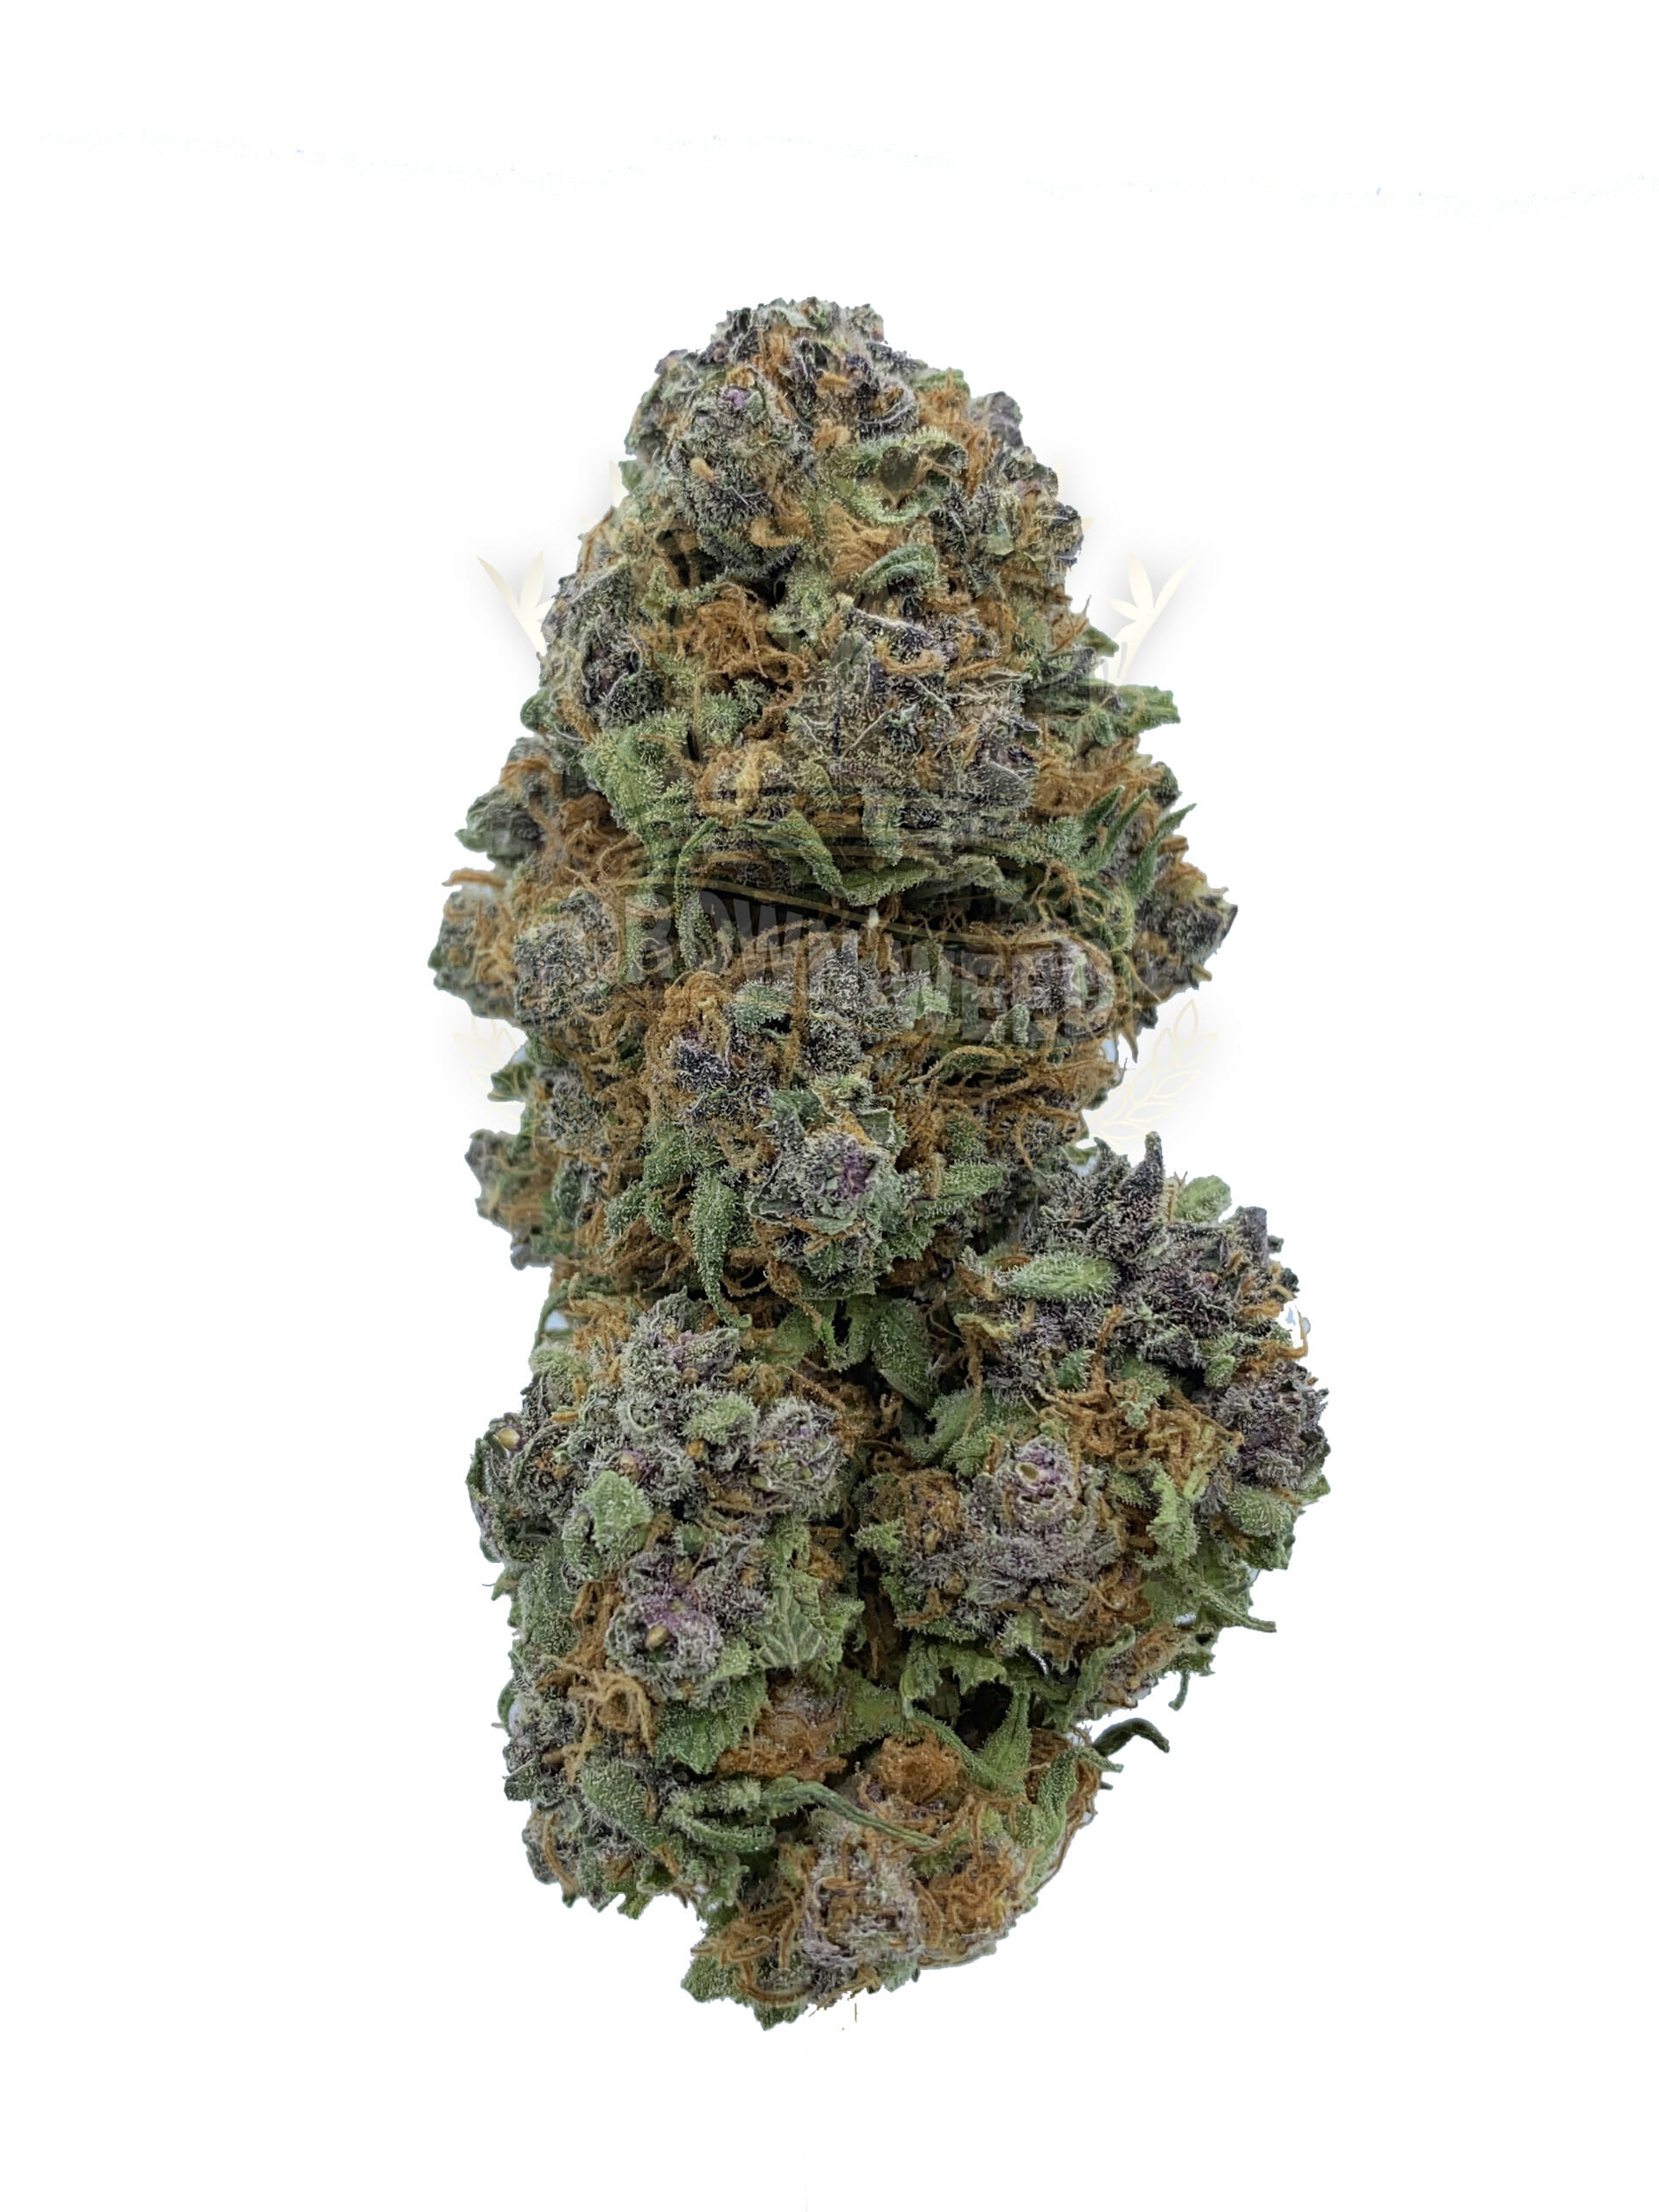 Know every detail of the Buy Weed service online for you to enjoy now. post thumbnail image